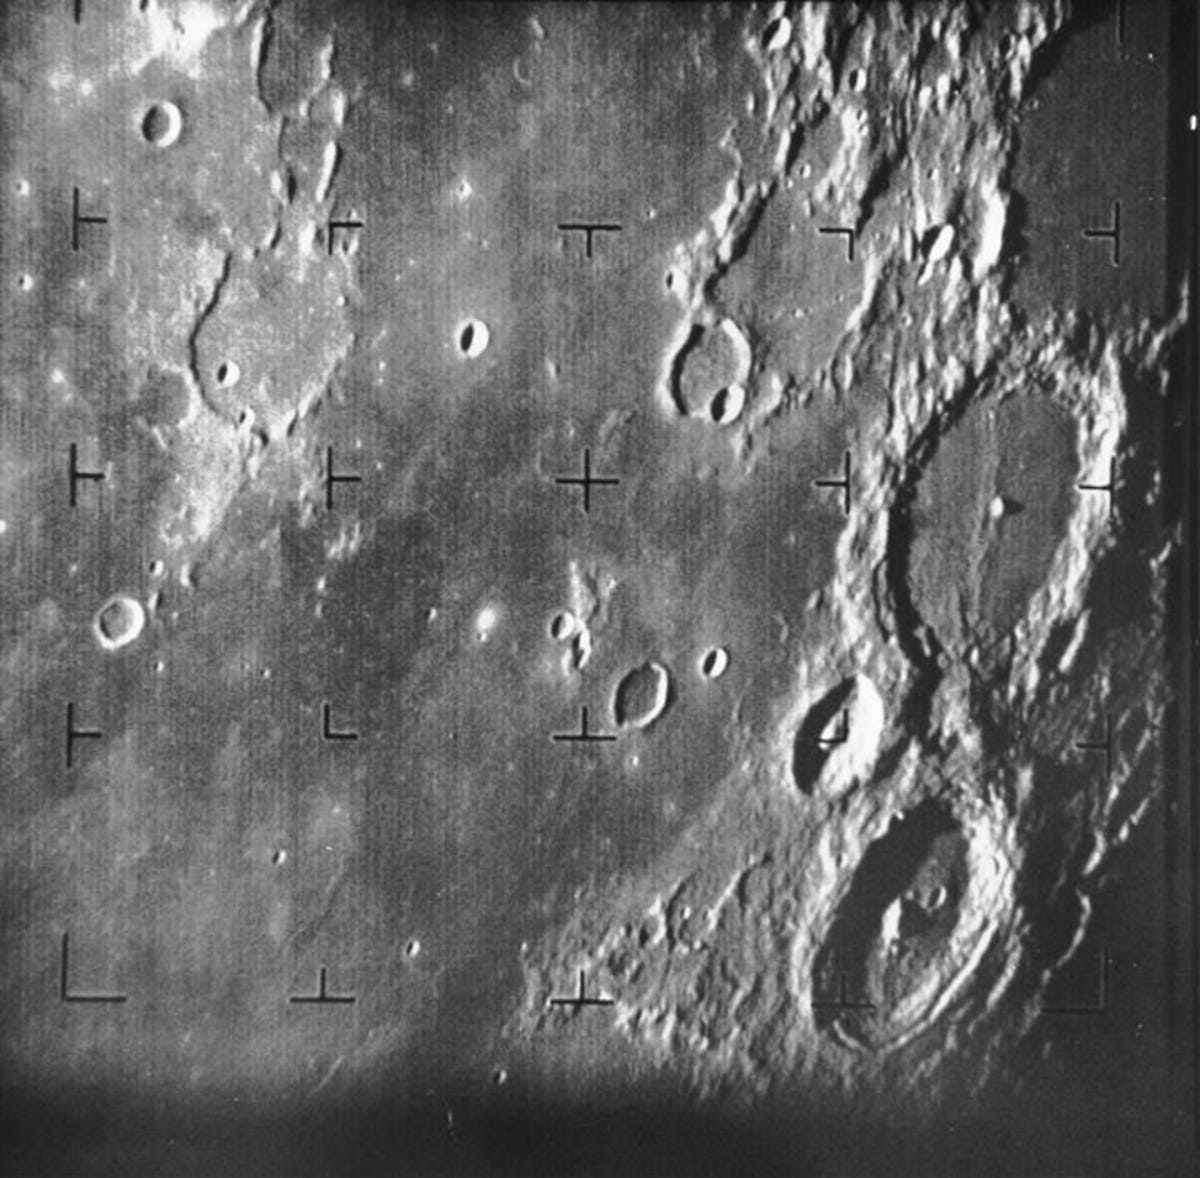 Ranger 7 image of the moon